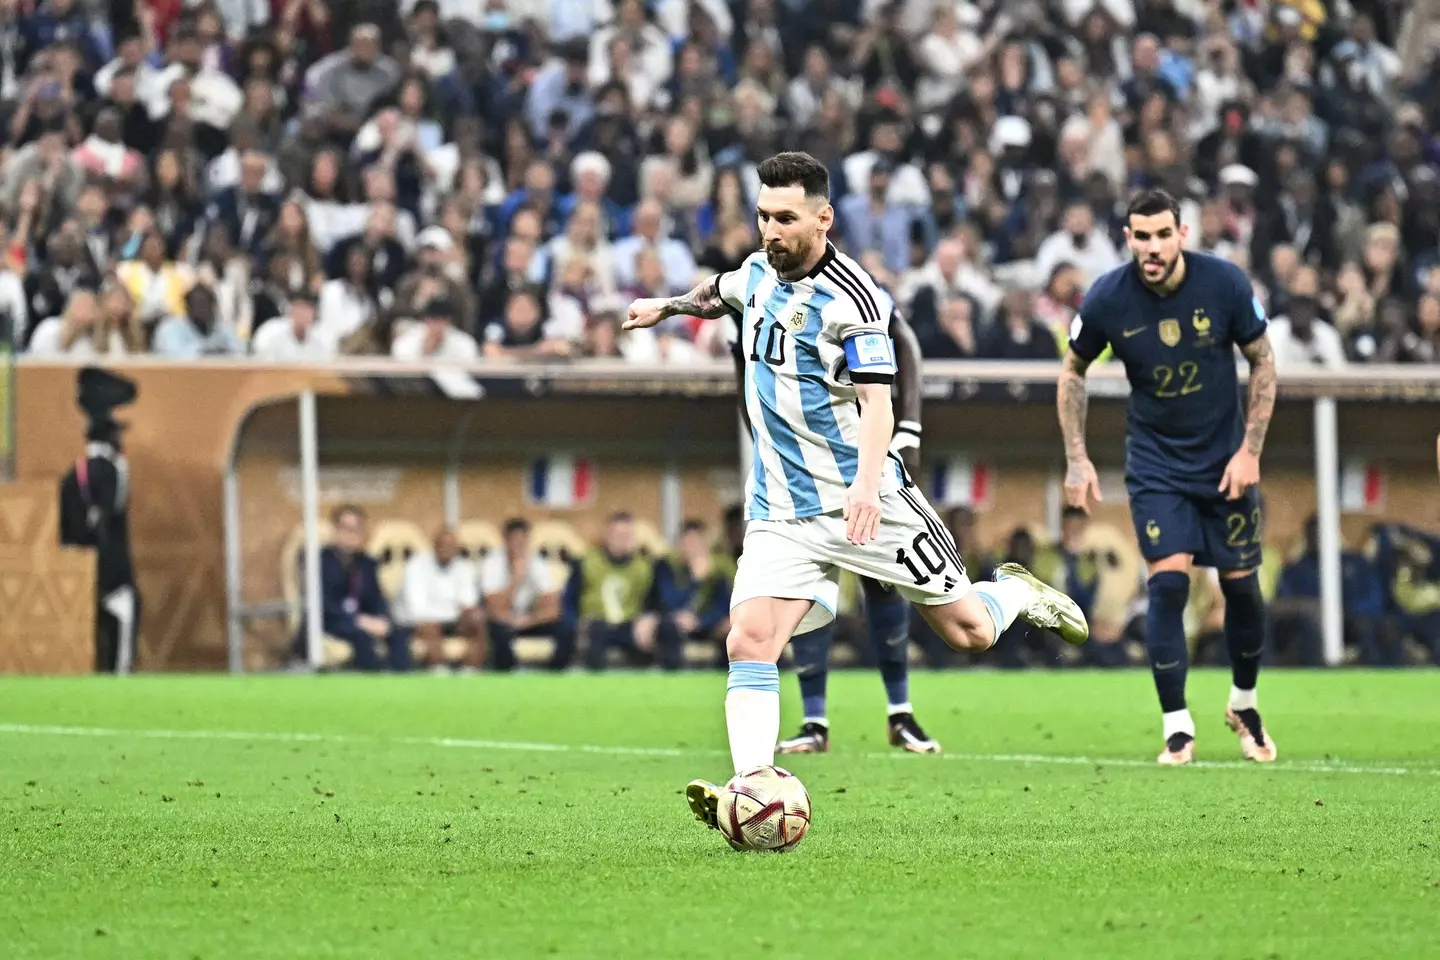 Messi scored from the penalty spot to open the scoring.